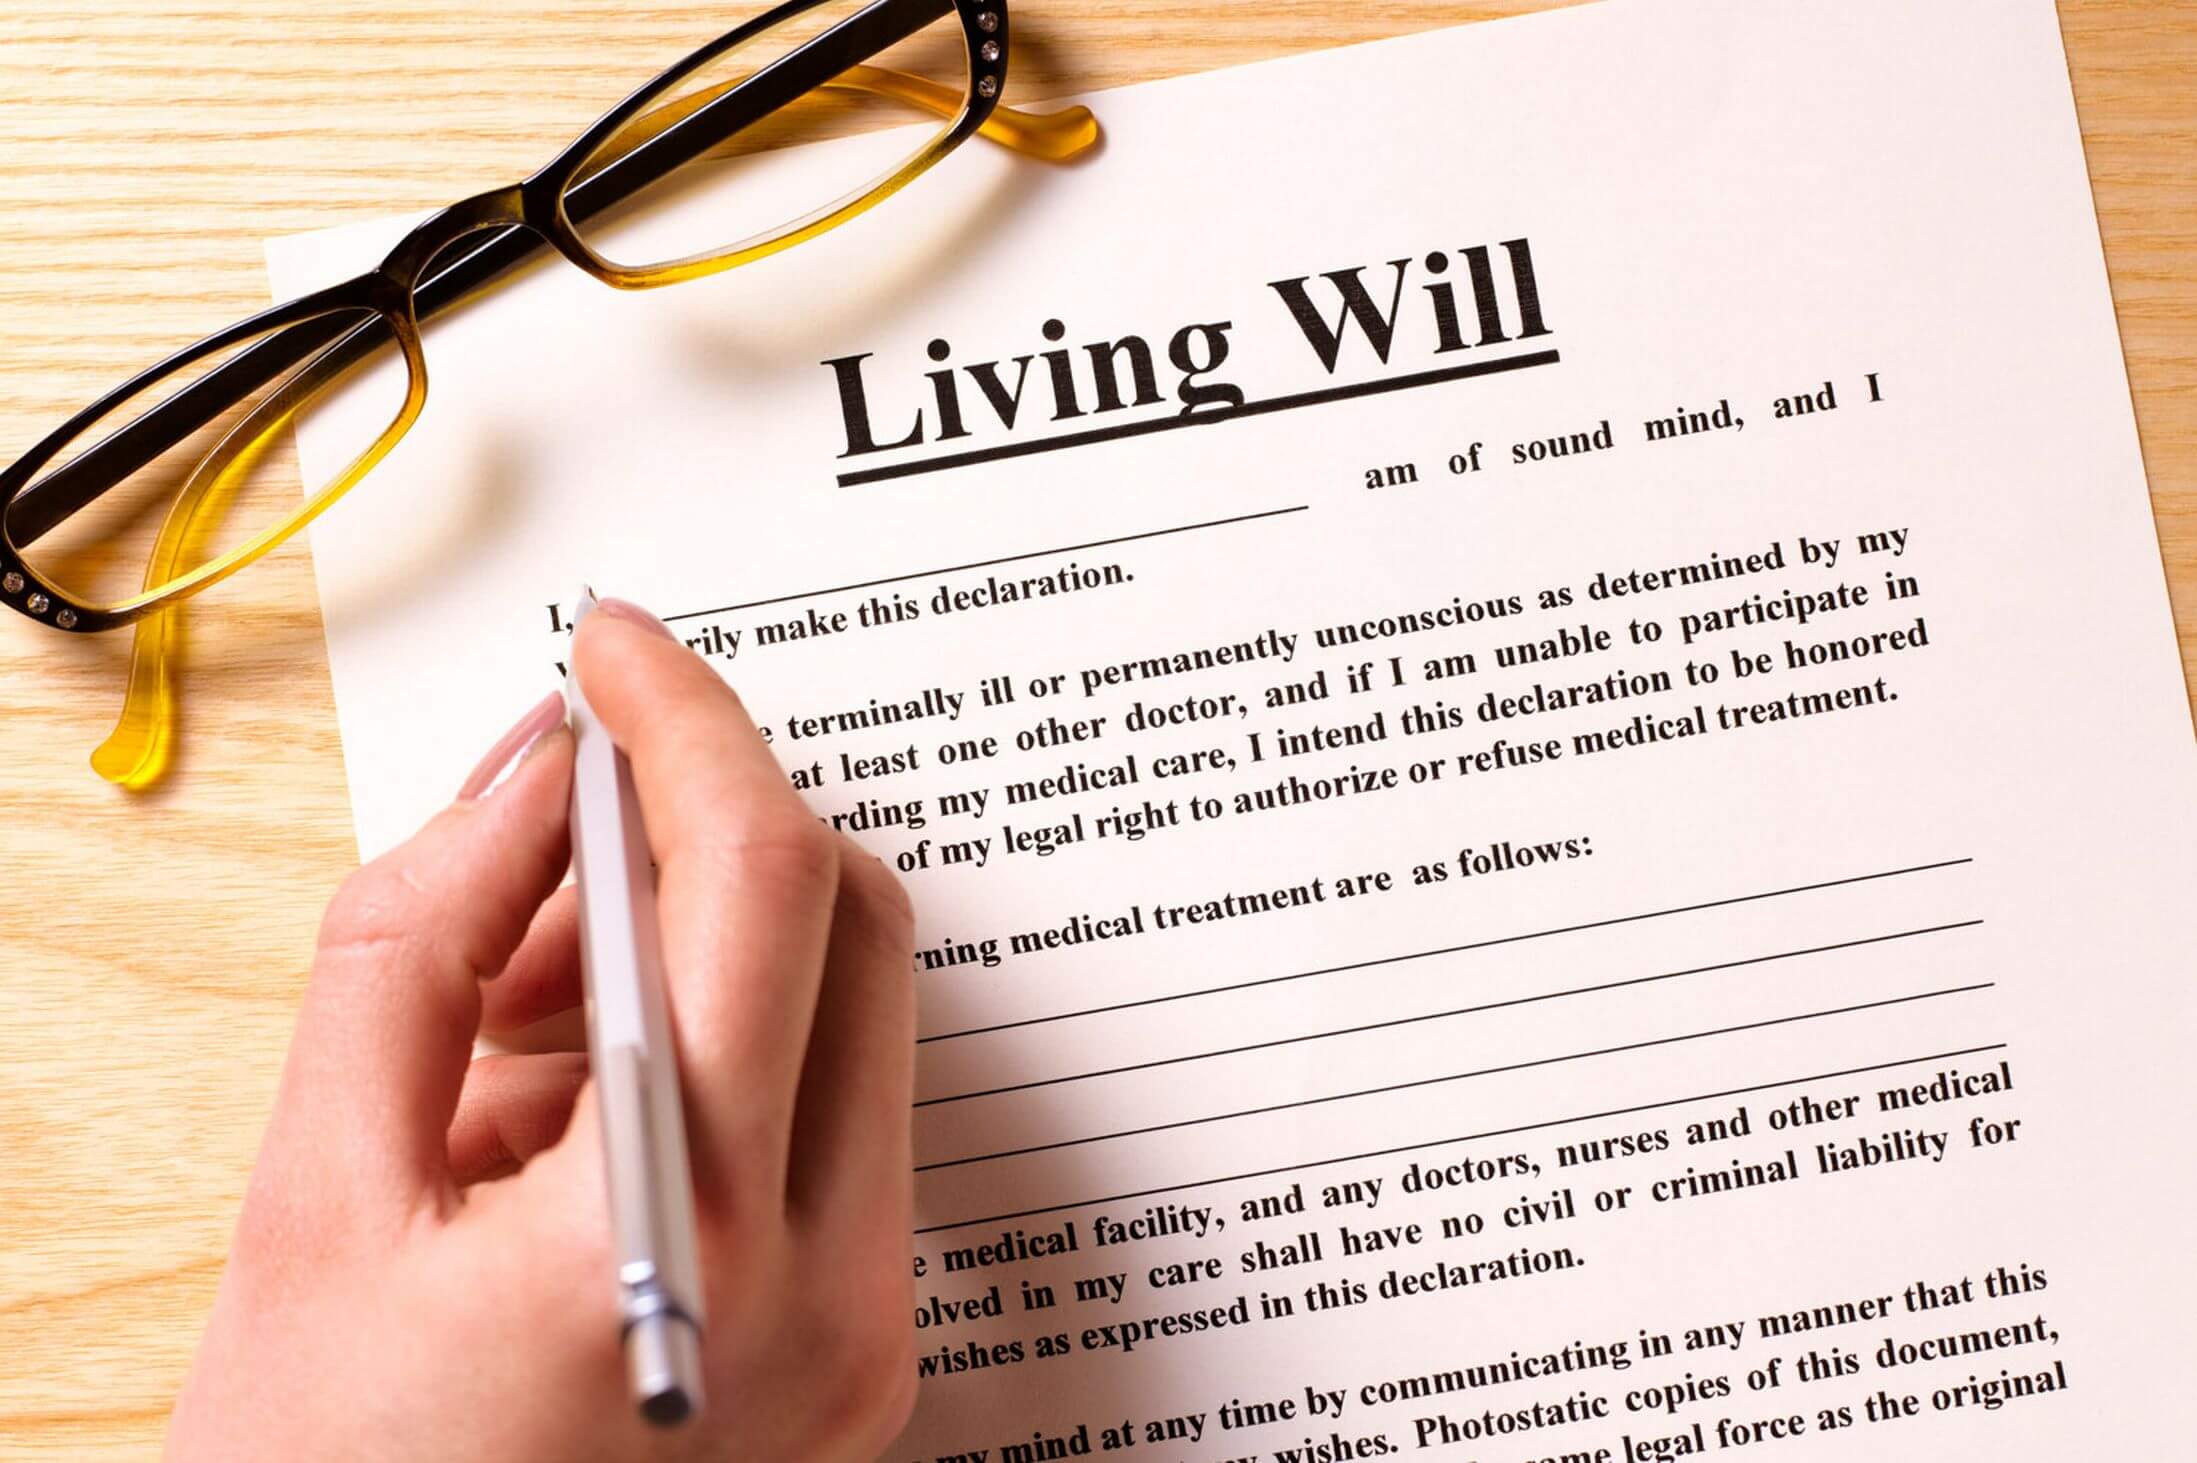 Living Will and Health Care Power of Attorney